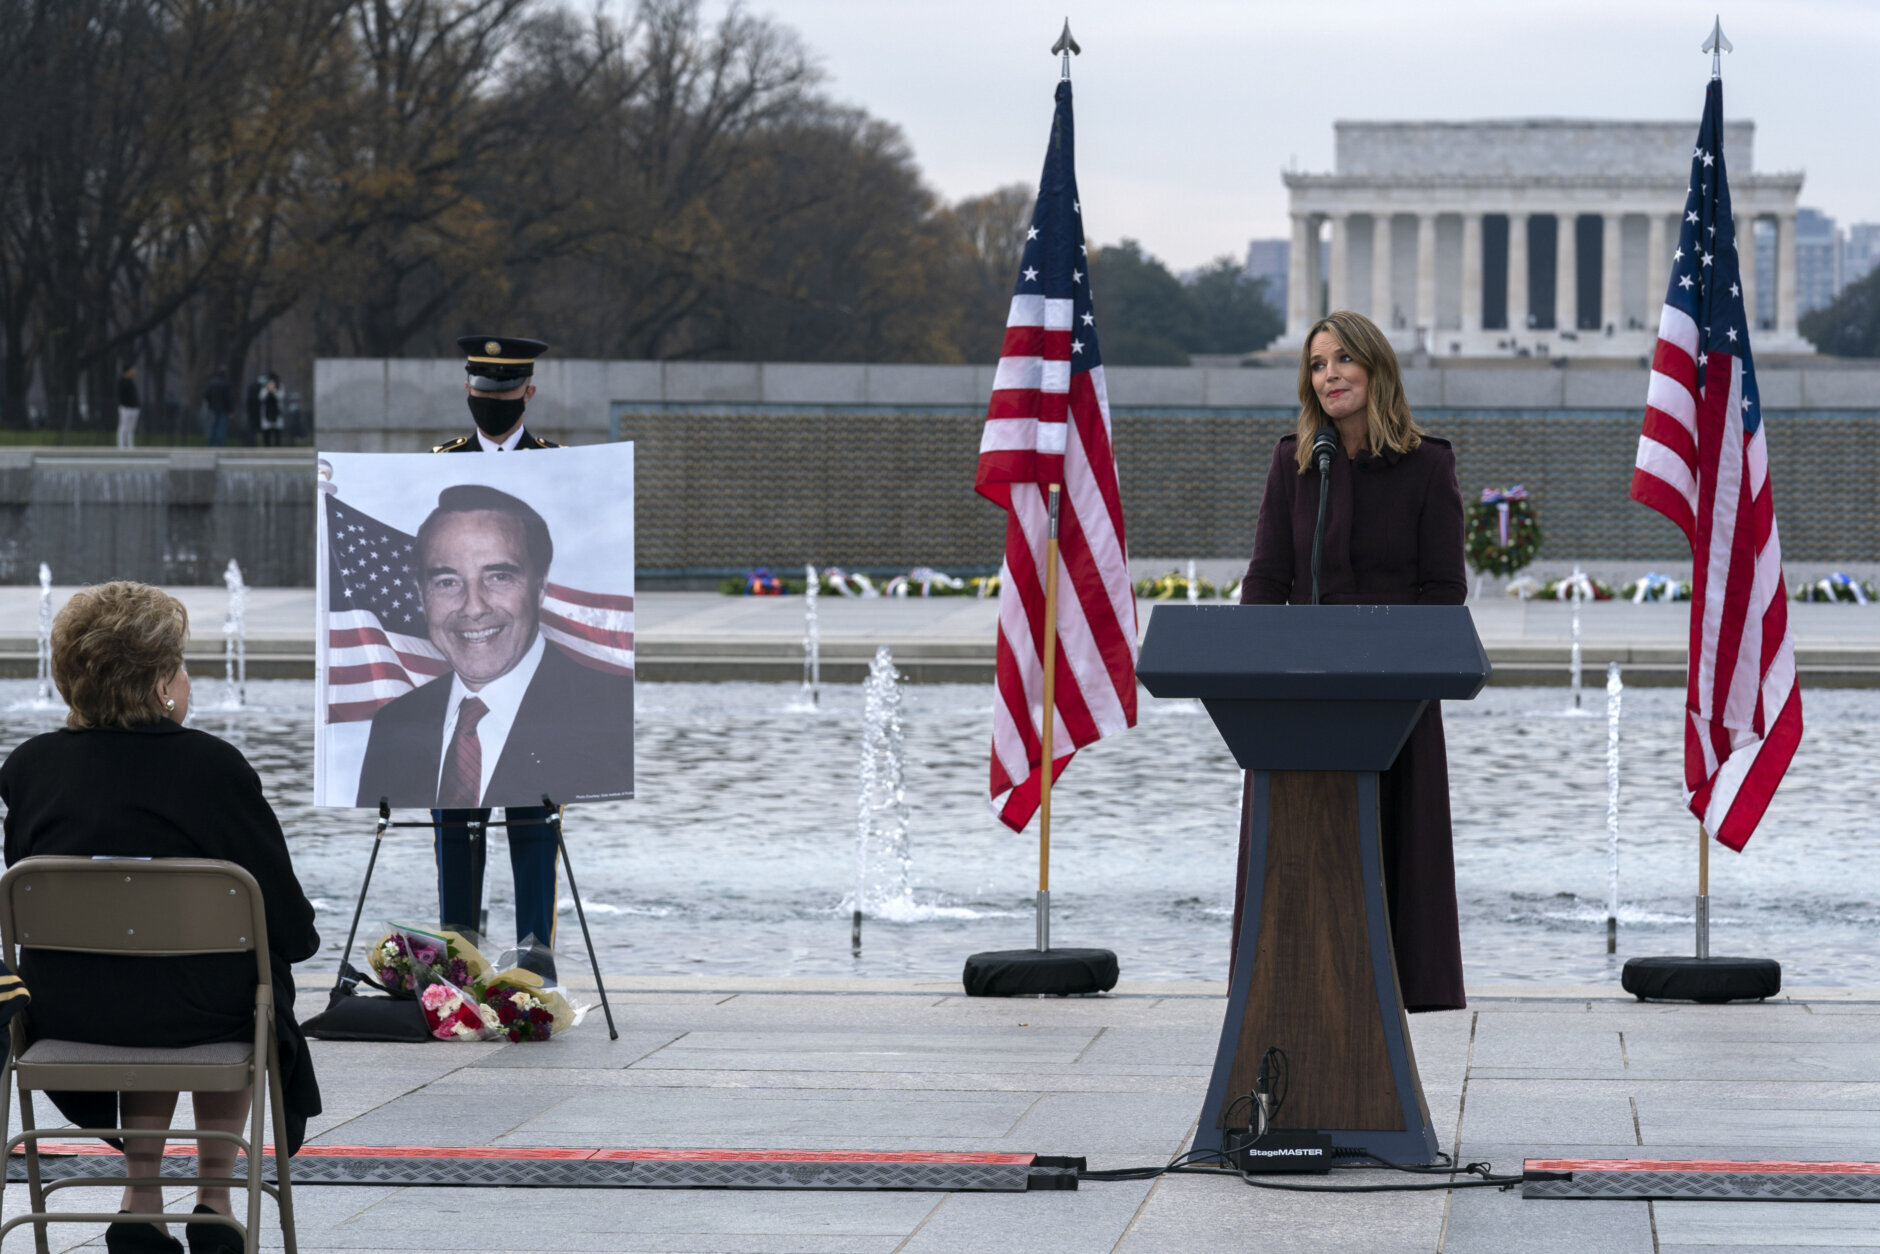 With the Lincoln Memorial in the background, Savannah Guthrie speaks during a ceremony in honor to former Sen. Bob Dole, R-Kan. as former Sen. Elizabeth Dole looks on at the National World War II Memorial, on Friday, Dec. 10, 2021, in Washington. (AP Photo/Jose Luis Magana)